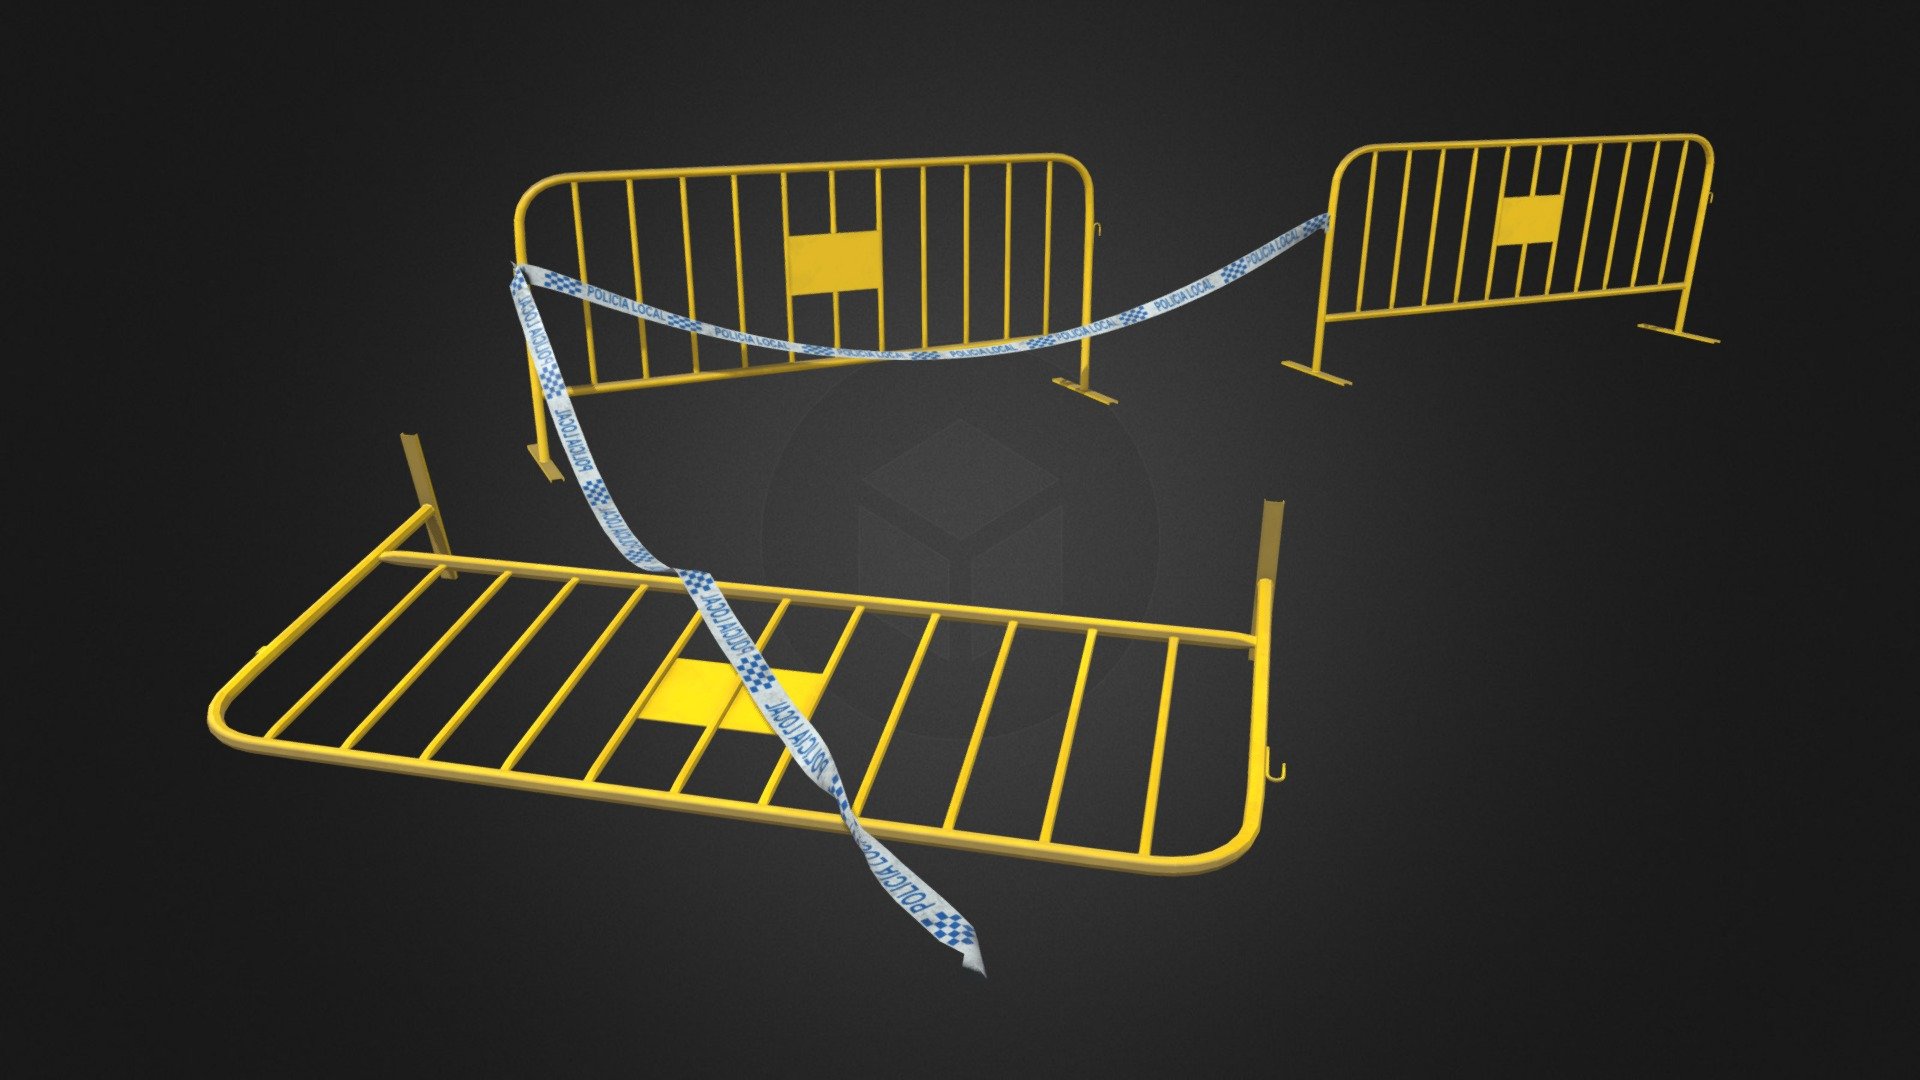 This is a simple Barrier/Fence used in construction works and other places 3d model